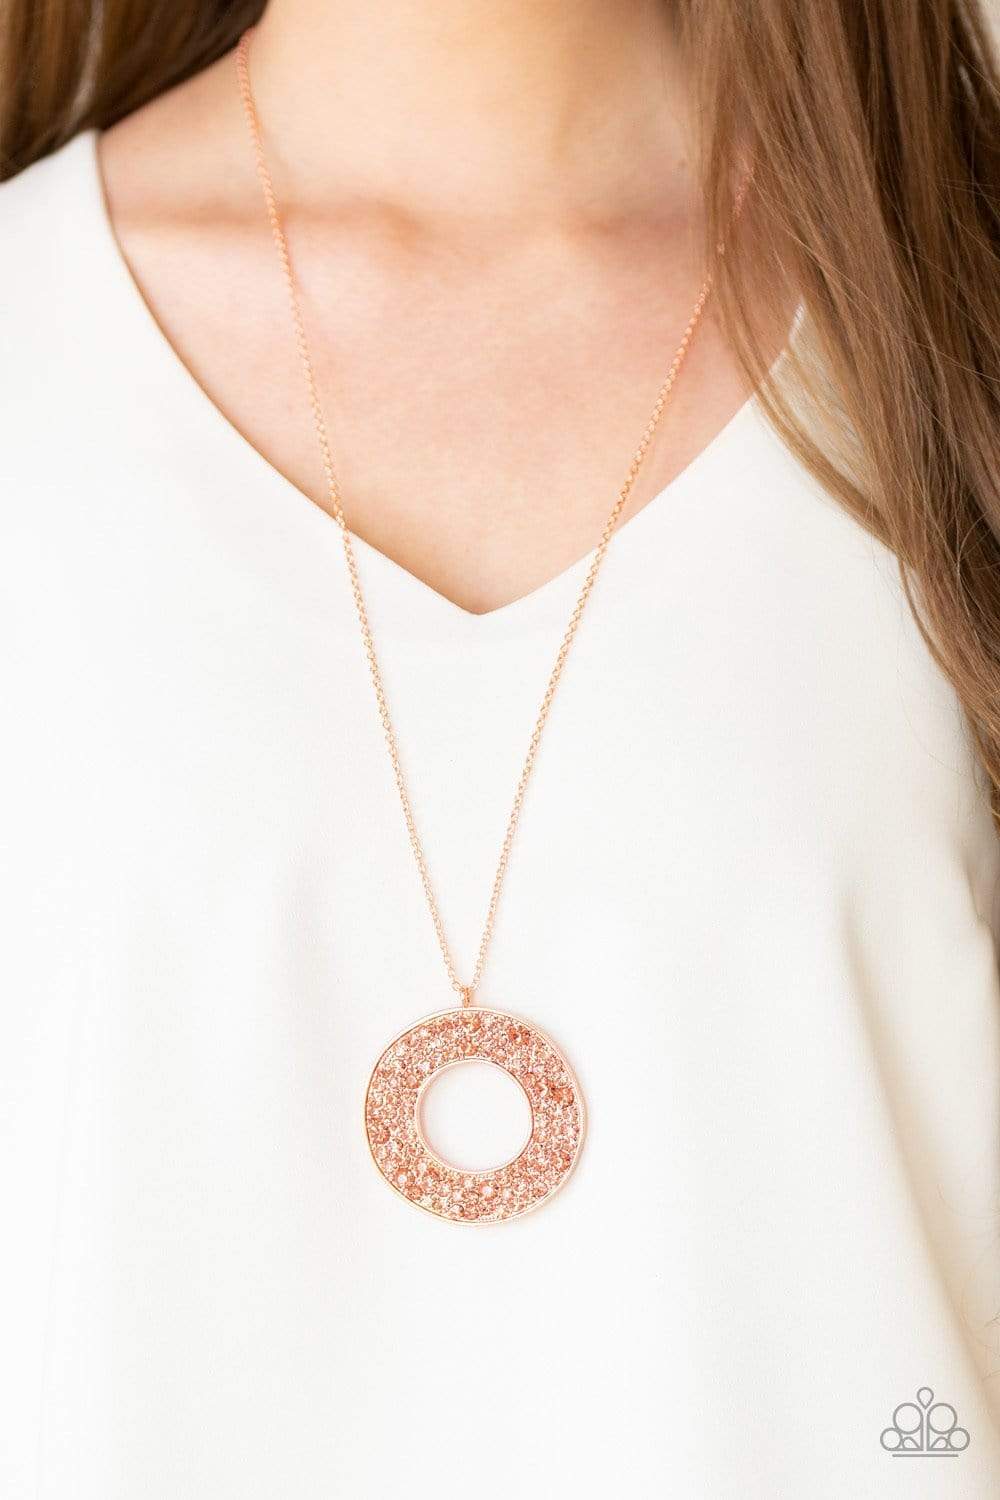 Bad HEIR Day - Copper - Paparazzi Necklace